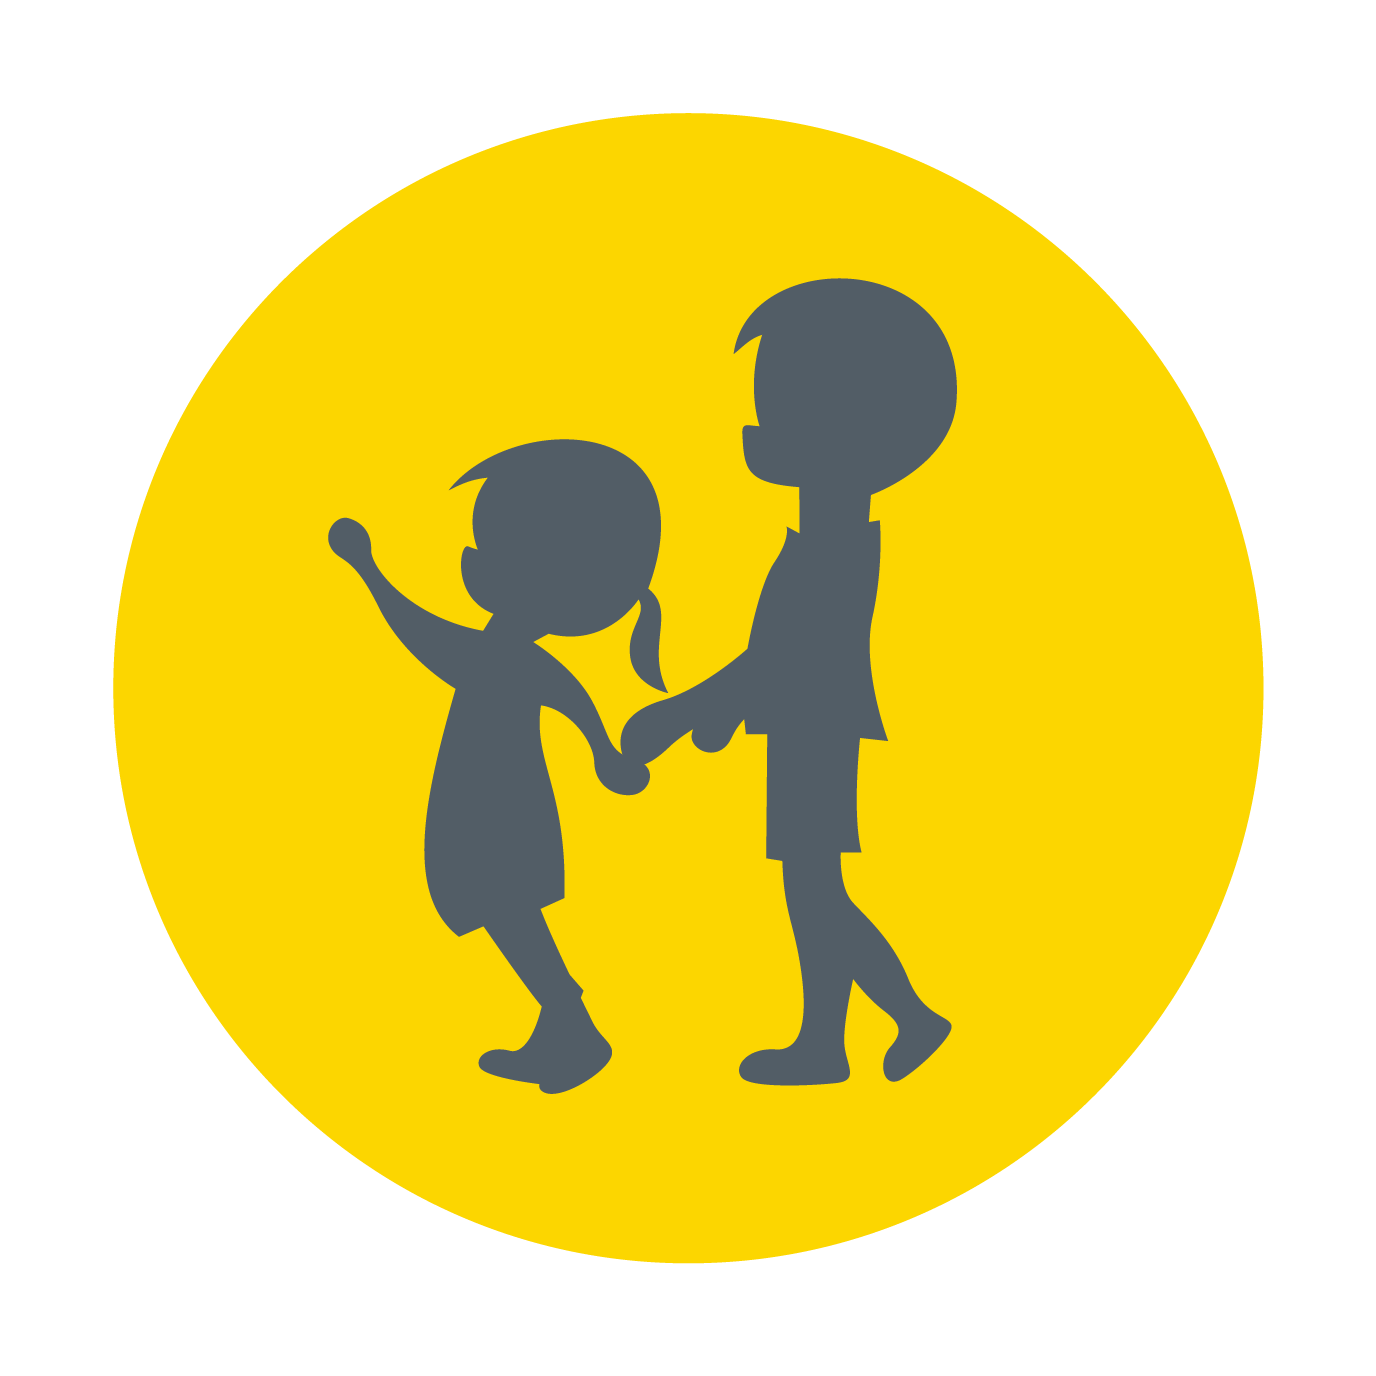 Out and about children illustration in a yellow circle